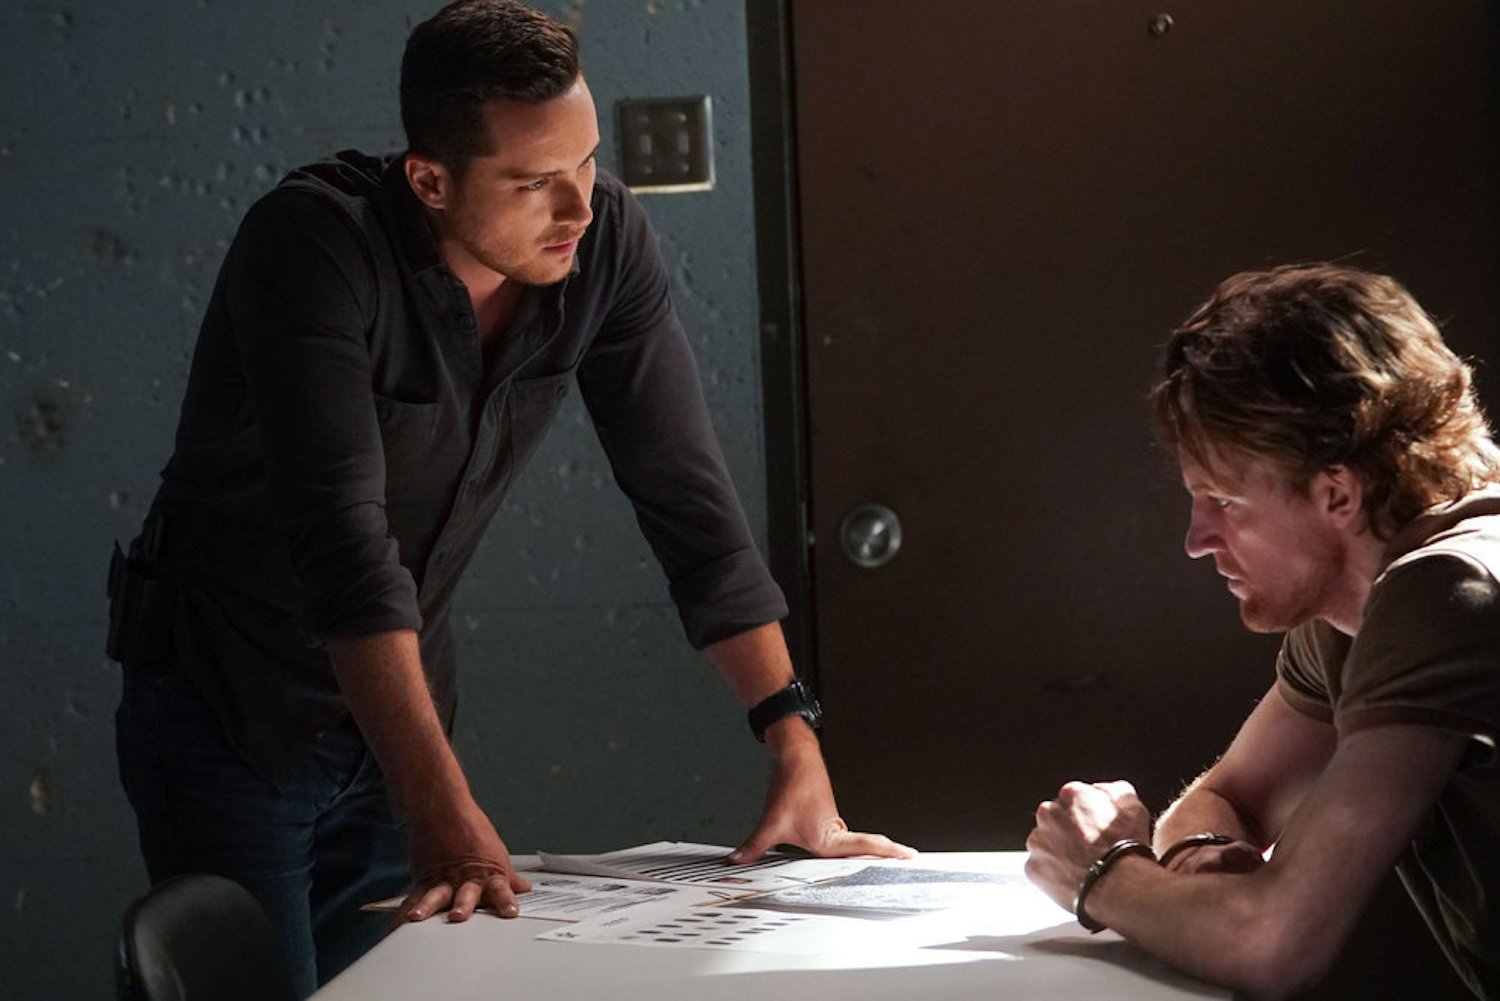 Jesse Lee Soffer as Jay Halstead in interrogating someone in 'Chicago P.D.' Season 10